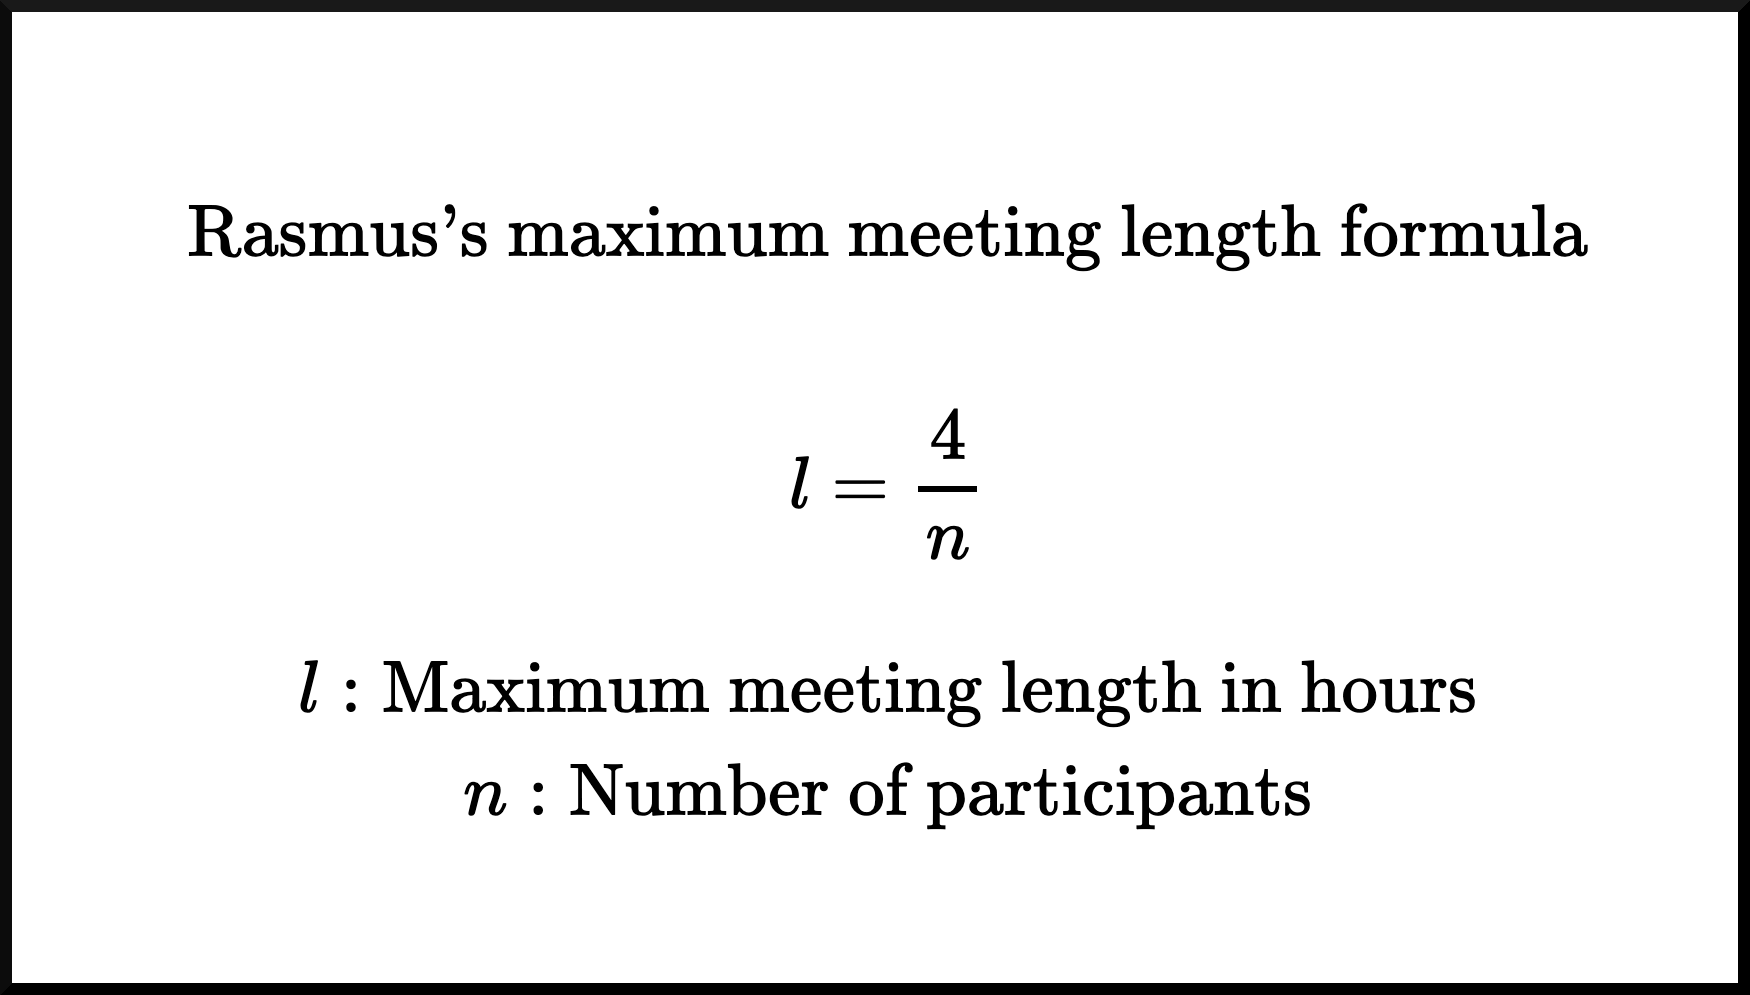 Maximum meeting length equals 4 hours divided by the number of participants.